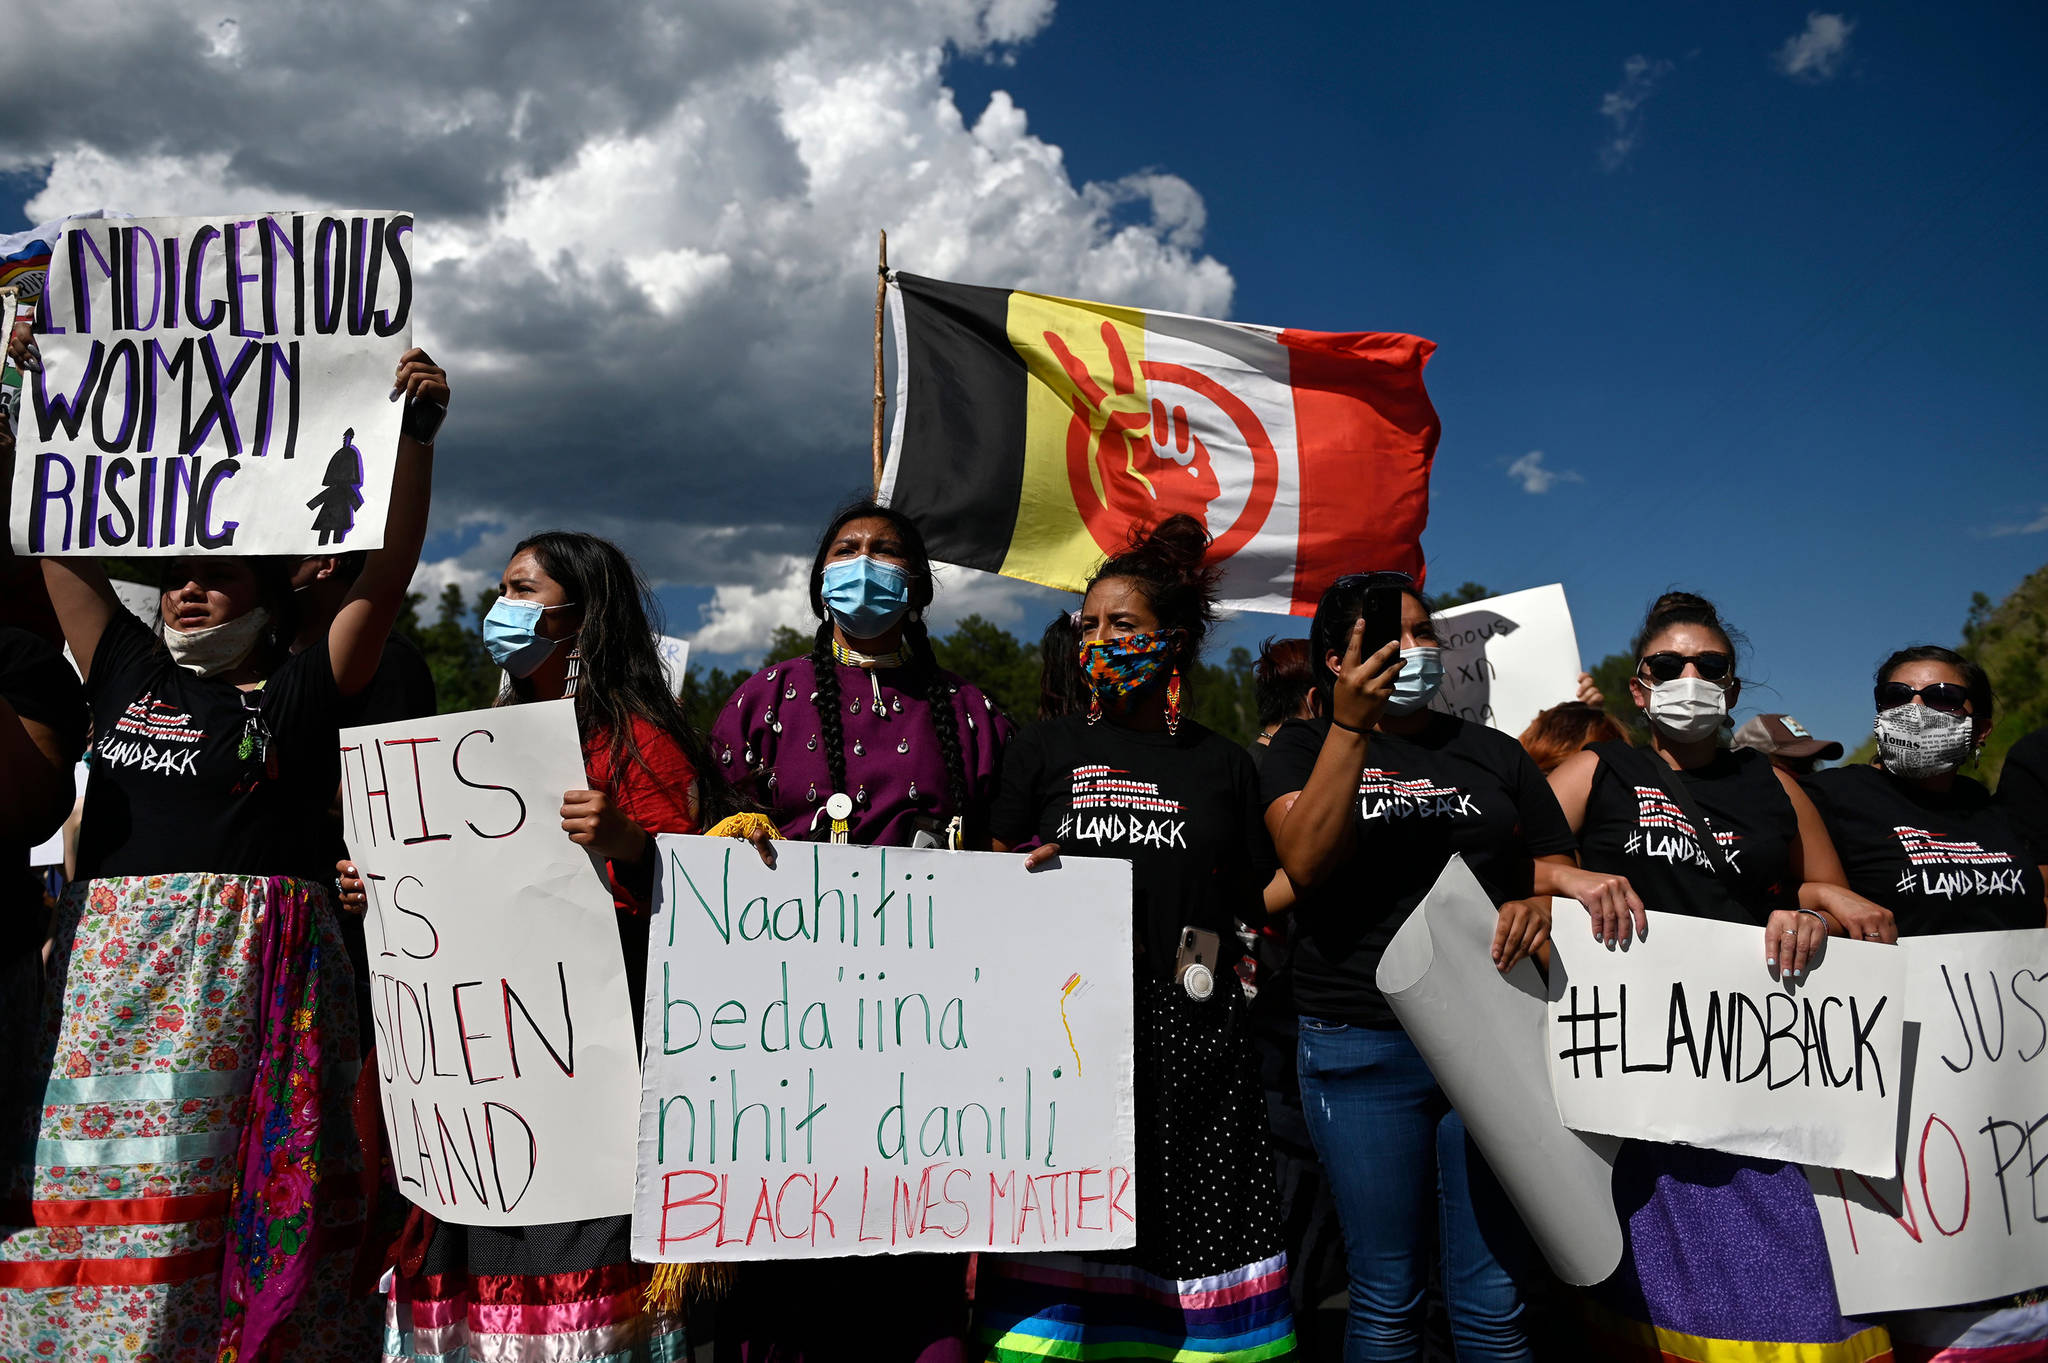 Activists and members of different tribes from the region block the road to Mount Rushmore National Monument as they protest in Keystone, South Dakota on July 3, 2020, during a demonstration around the Mount Rushmore National Monument and the visit of US President Donald Trump. (Andrew Caballero-Reynolds/AFP/Getty Images/TNS)